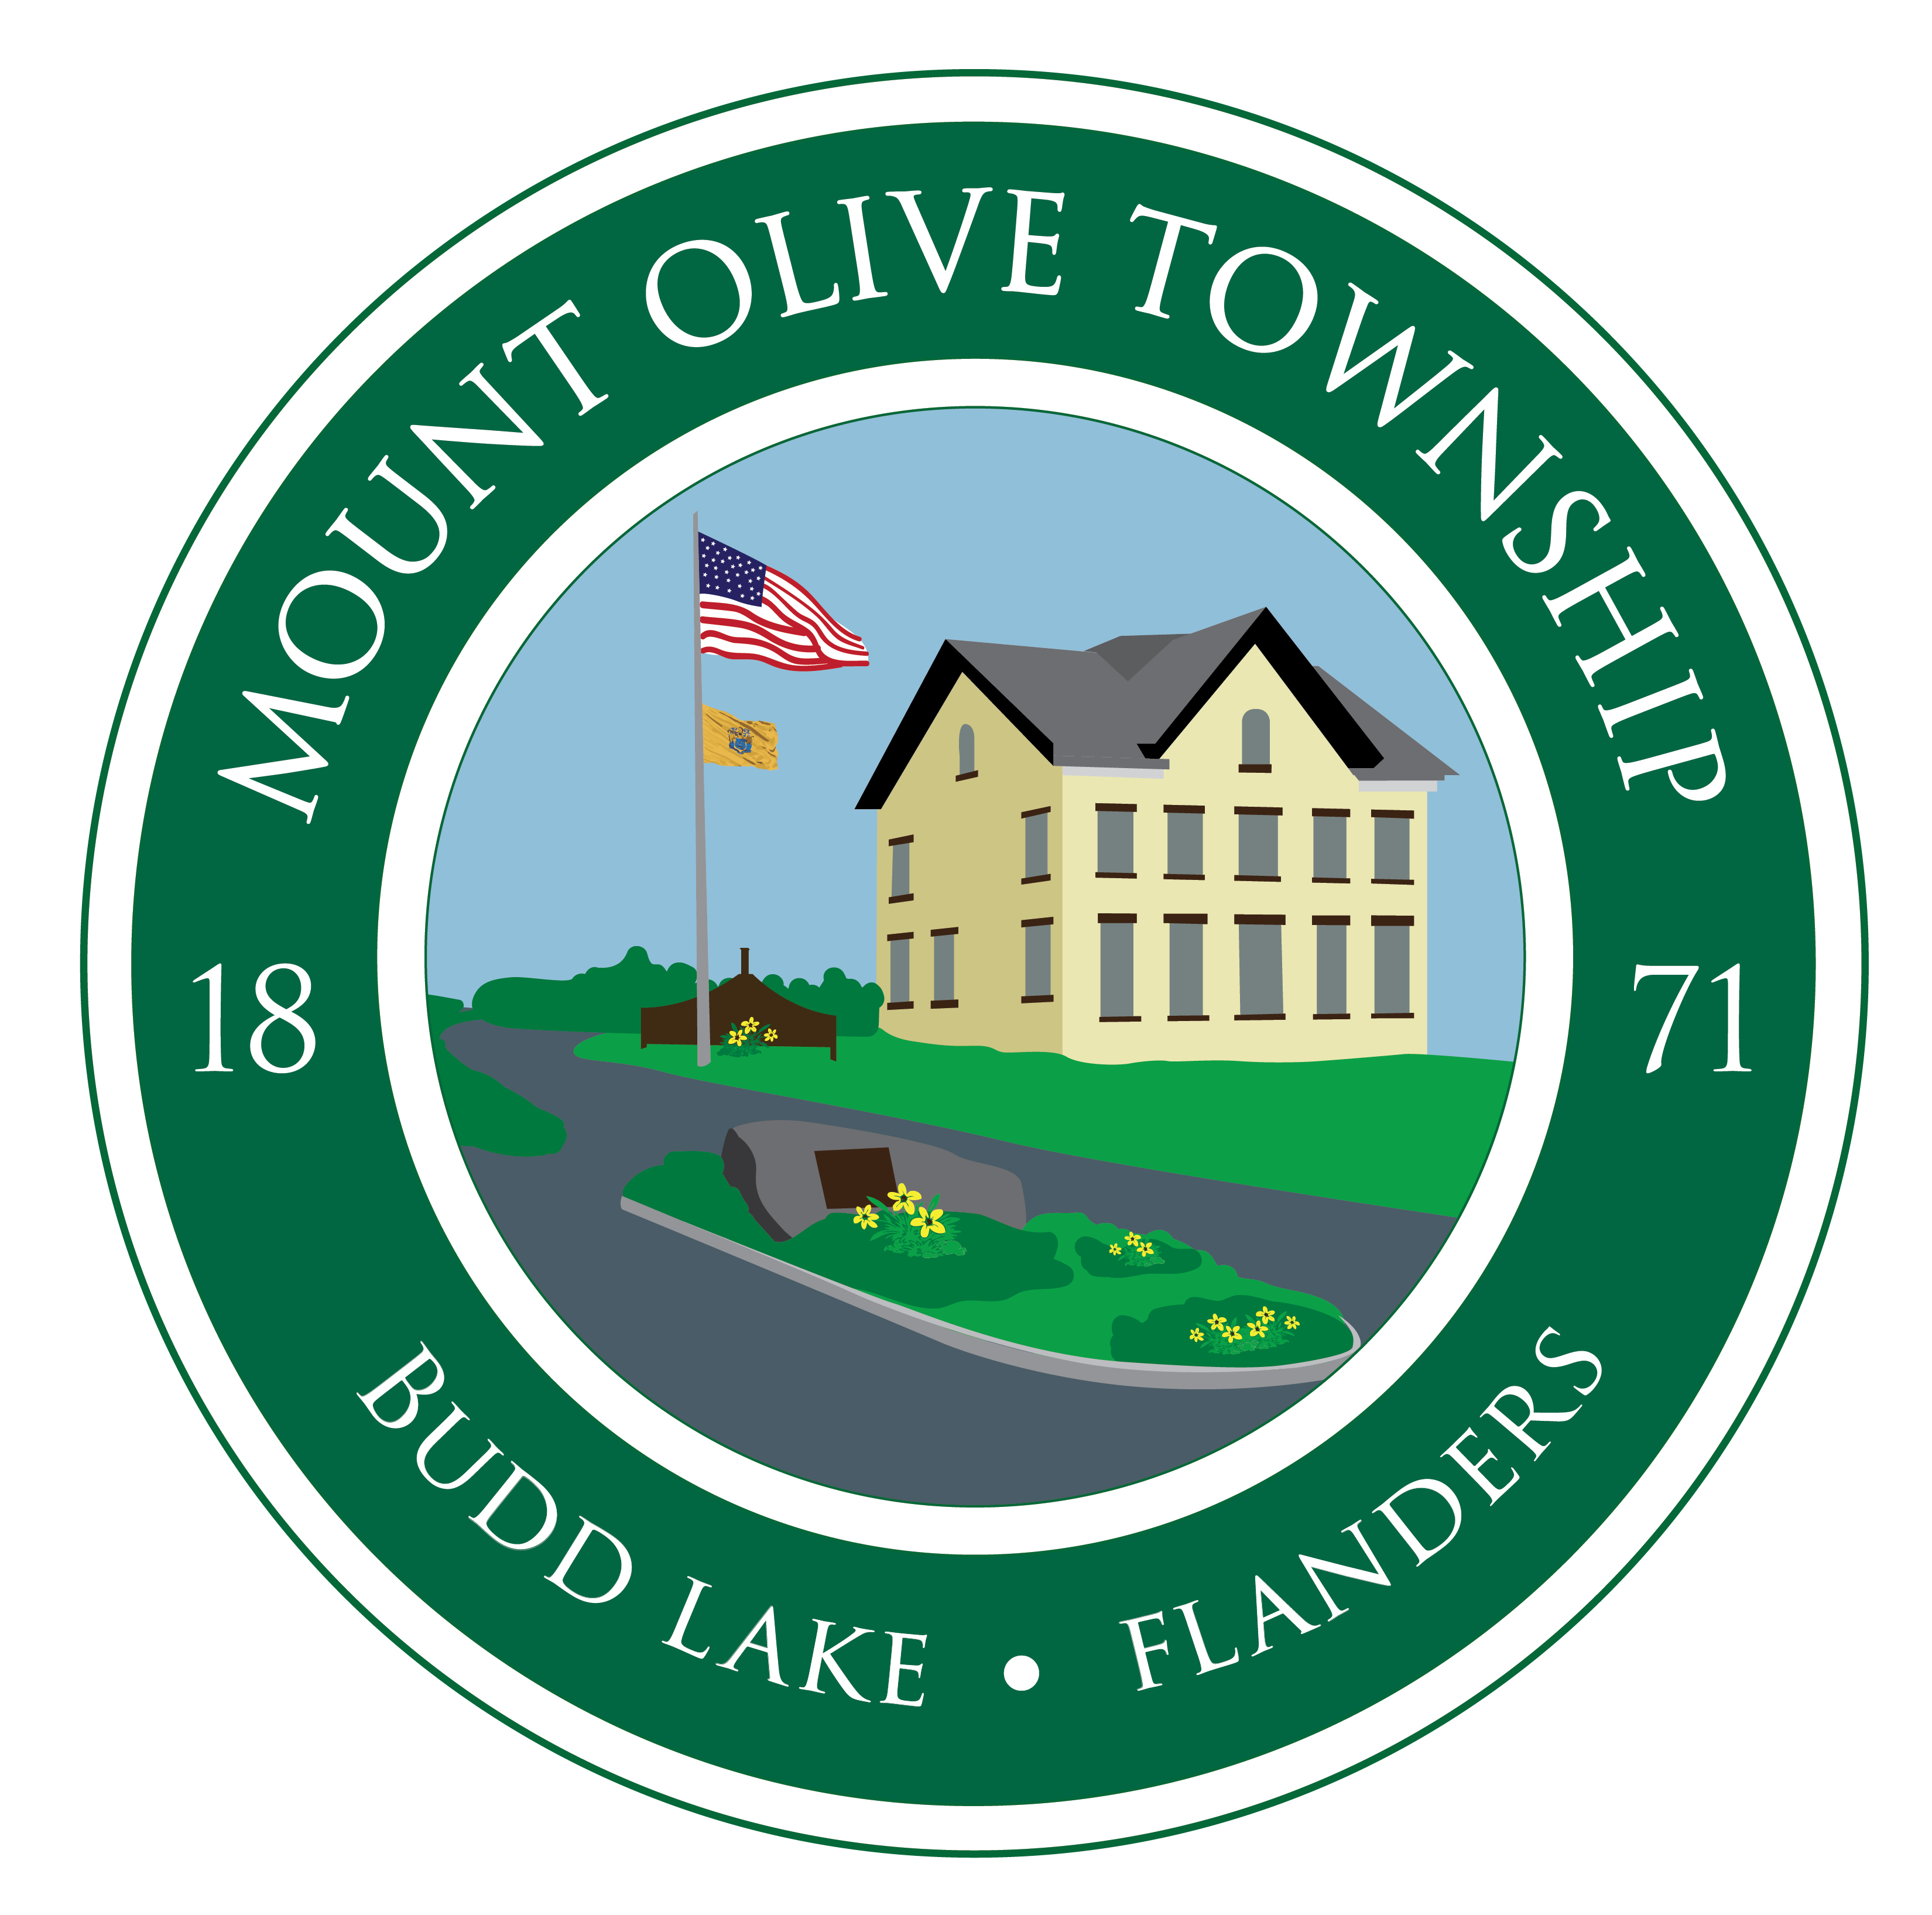 Mt Olive at 150